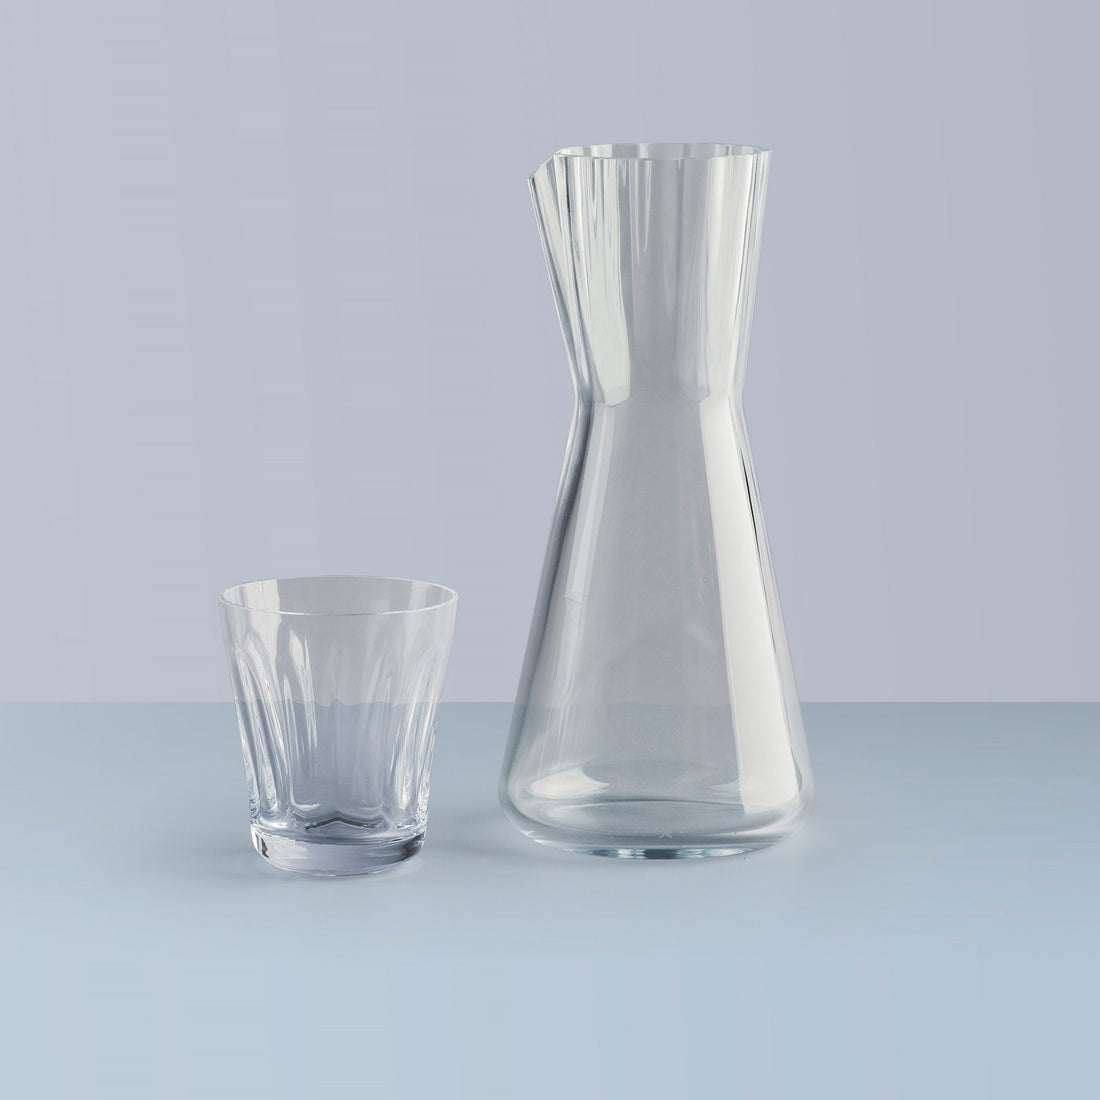 NUDE Lady Carafe and tumbler in clear leadfree crystal